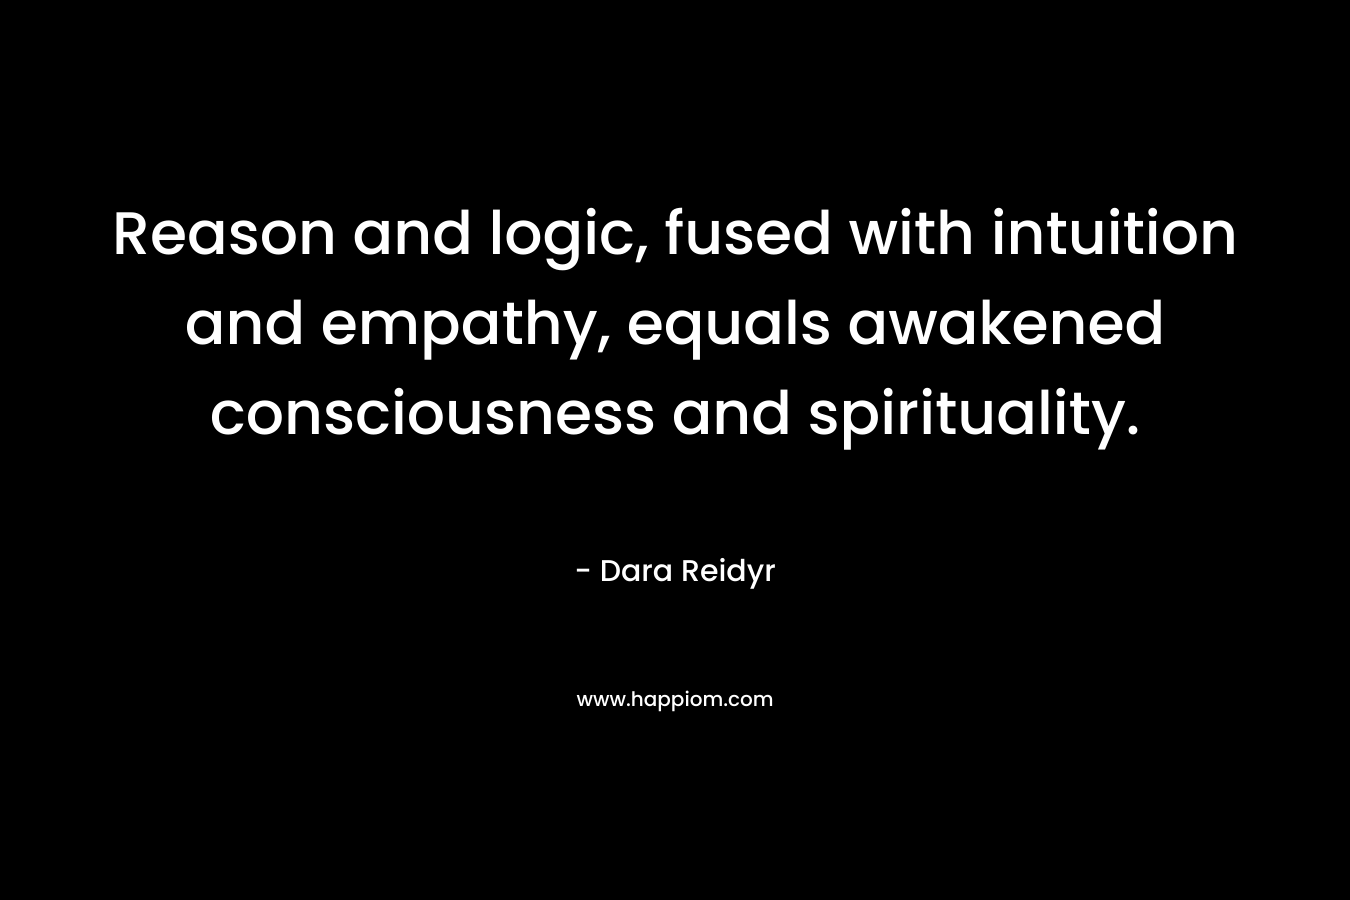 Reason and logic, fused with intuition and empathy, equals awakened consciousness and spirituality. – Dara Reidyr